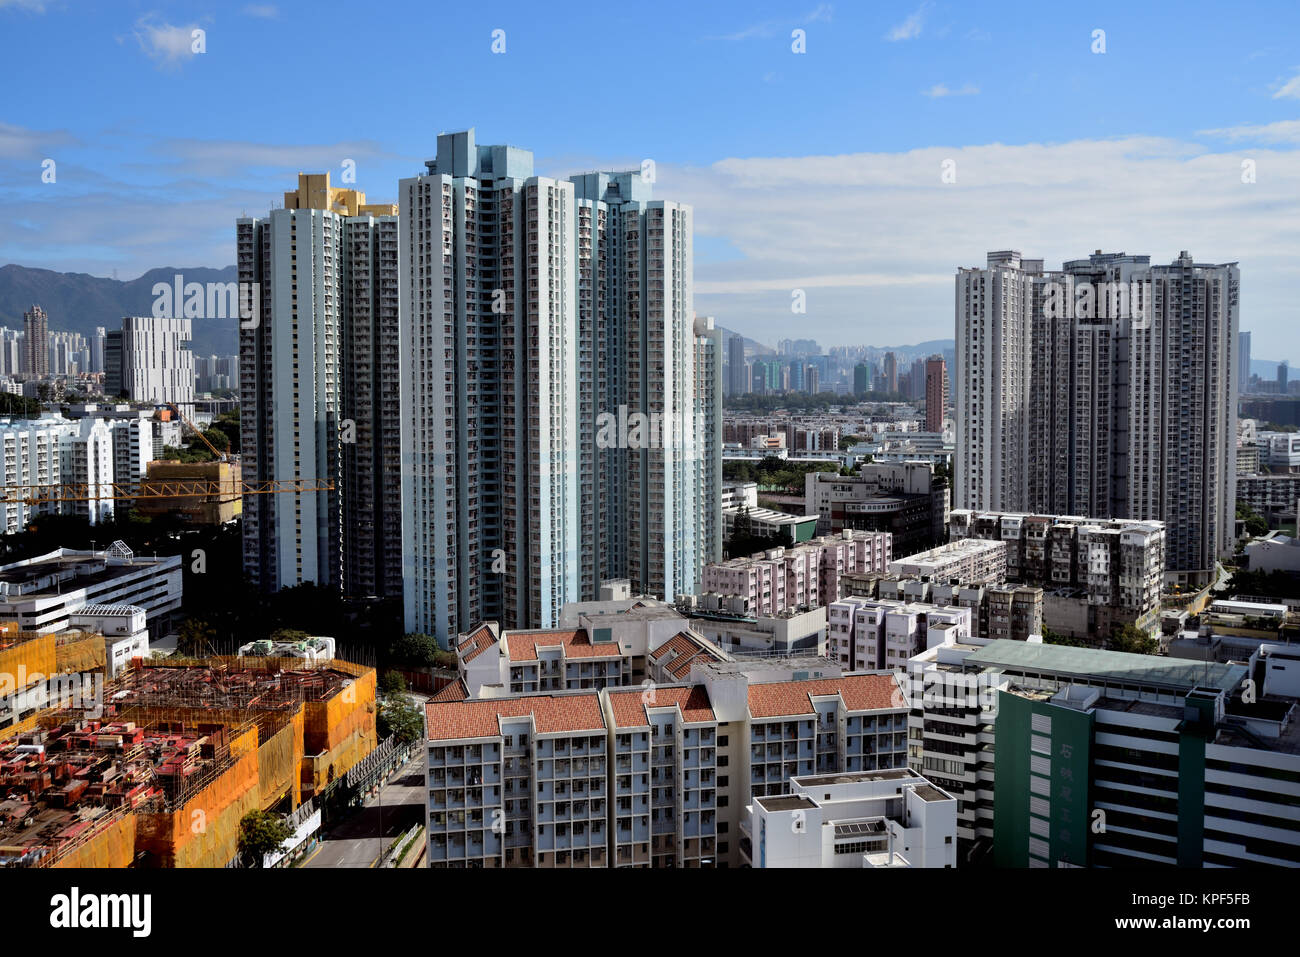 Re-development of decrepit residential  area sees towering blocks of new high-risers. Stock Photo